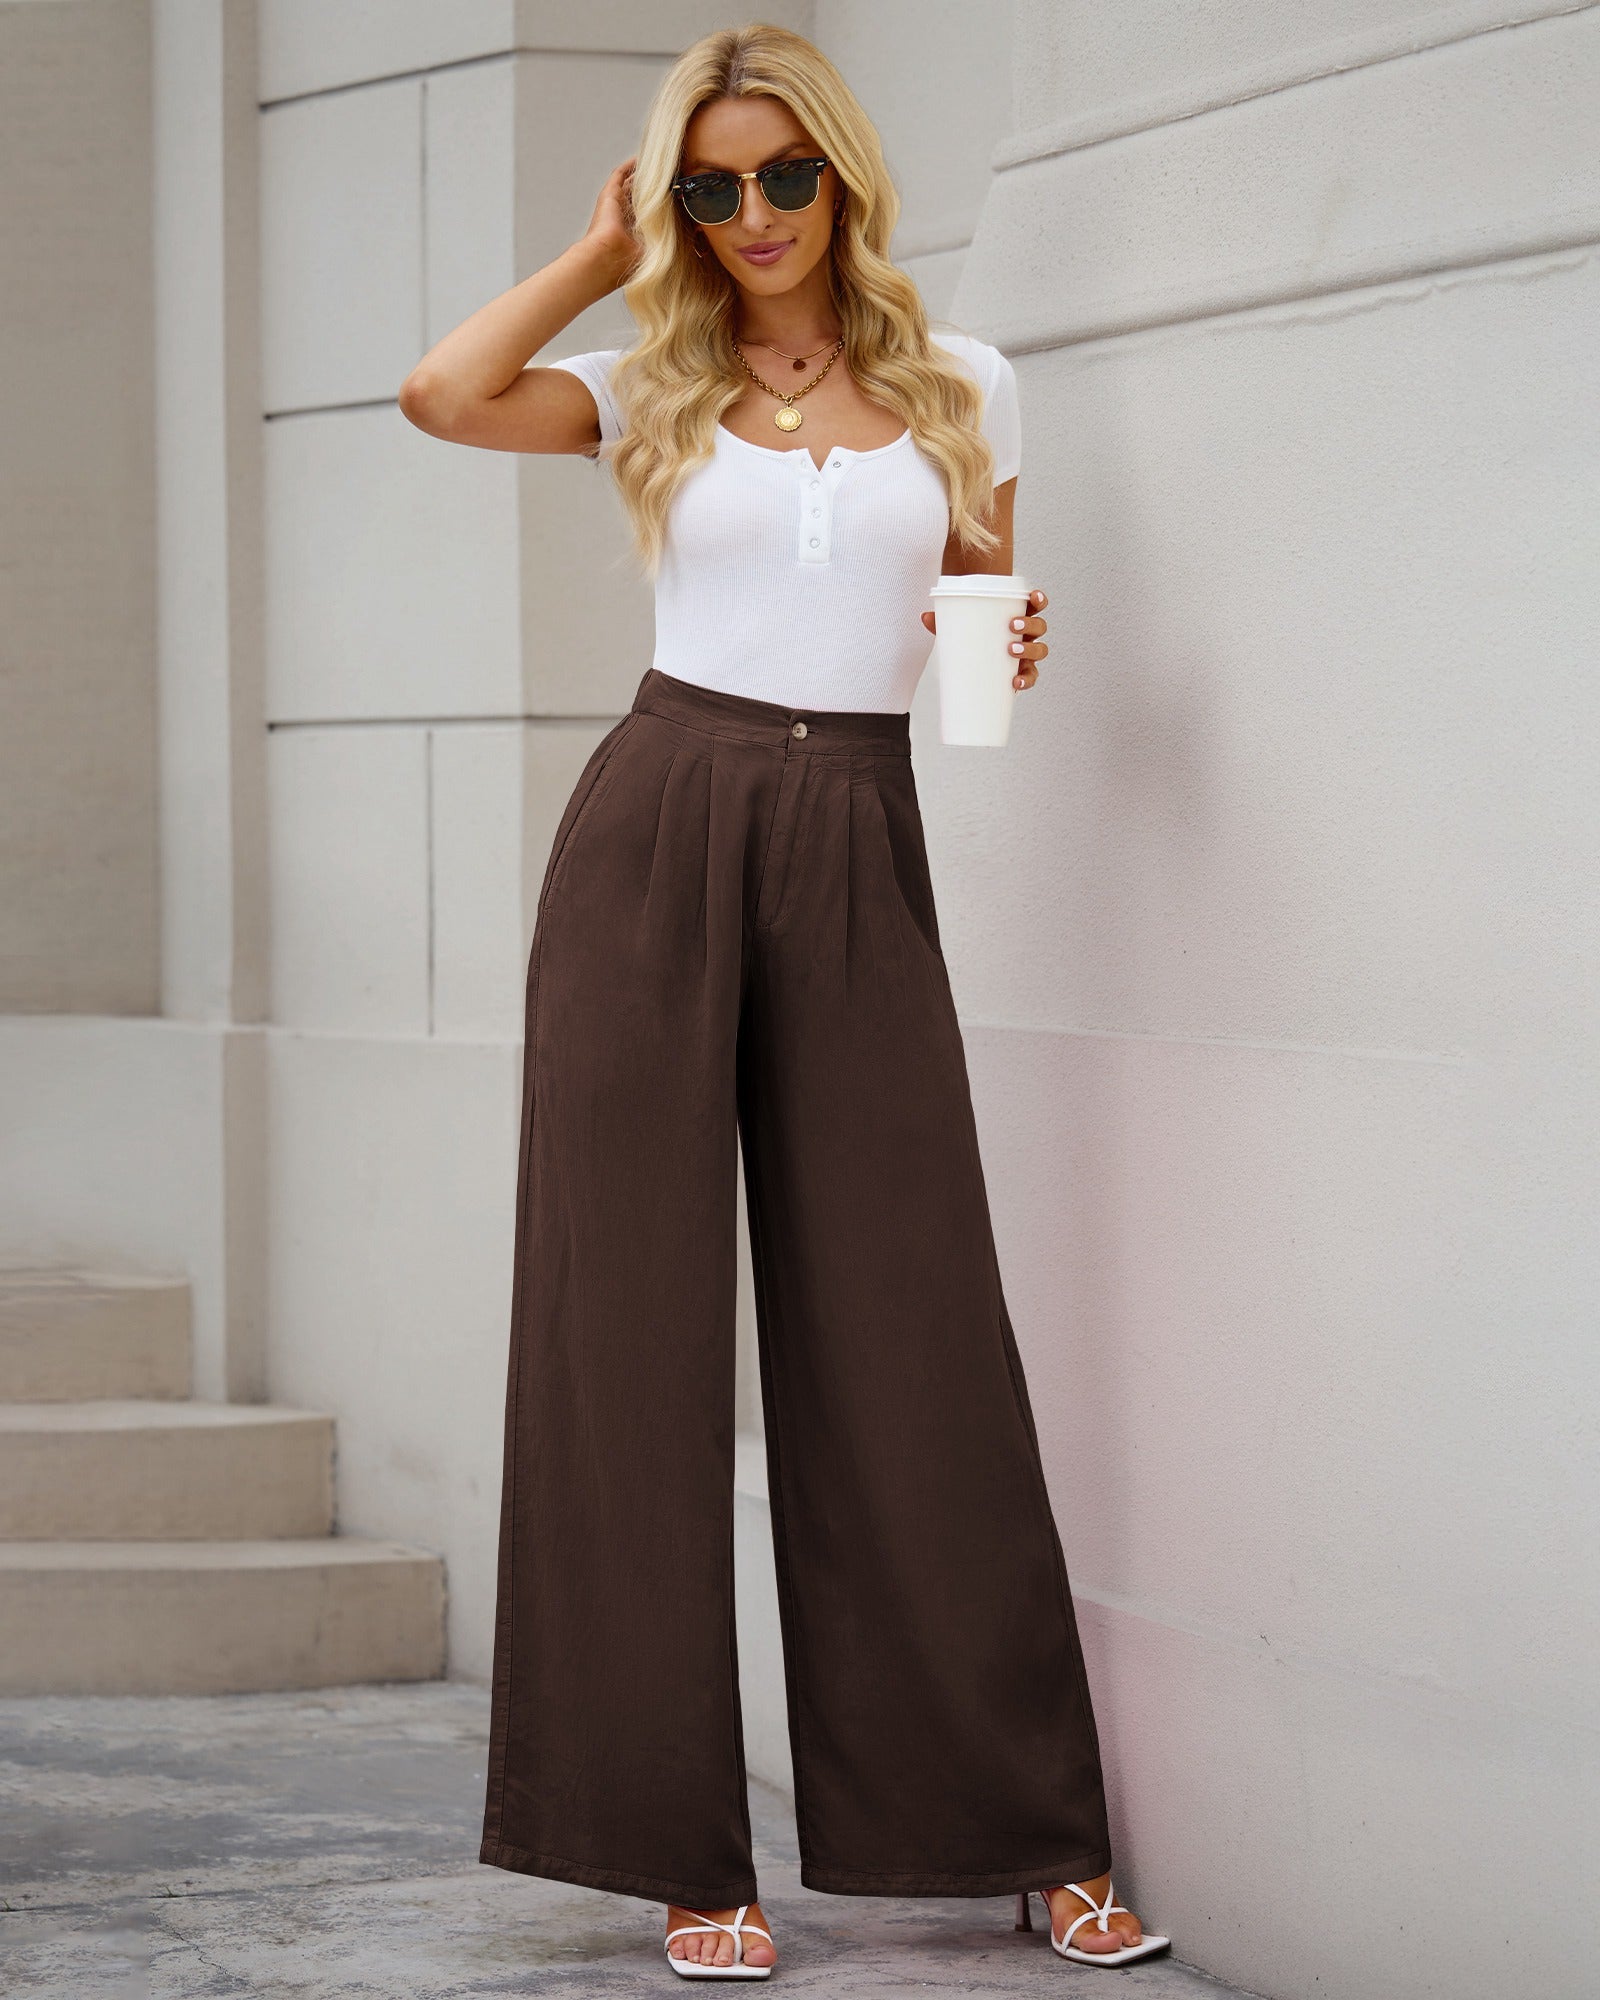 ALBIZIA High Waist Wide Leg Pant for Women Summer Casual Boho Floral Beach  Pants Bohemian Belted Trousers, Style-8, Large-X-Large price in UAE |  Amazon UAE | kanbkam